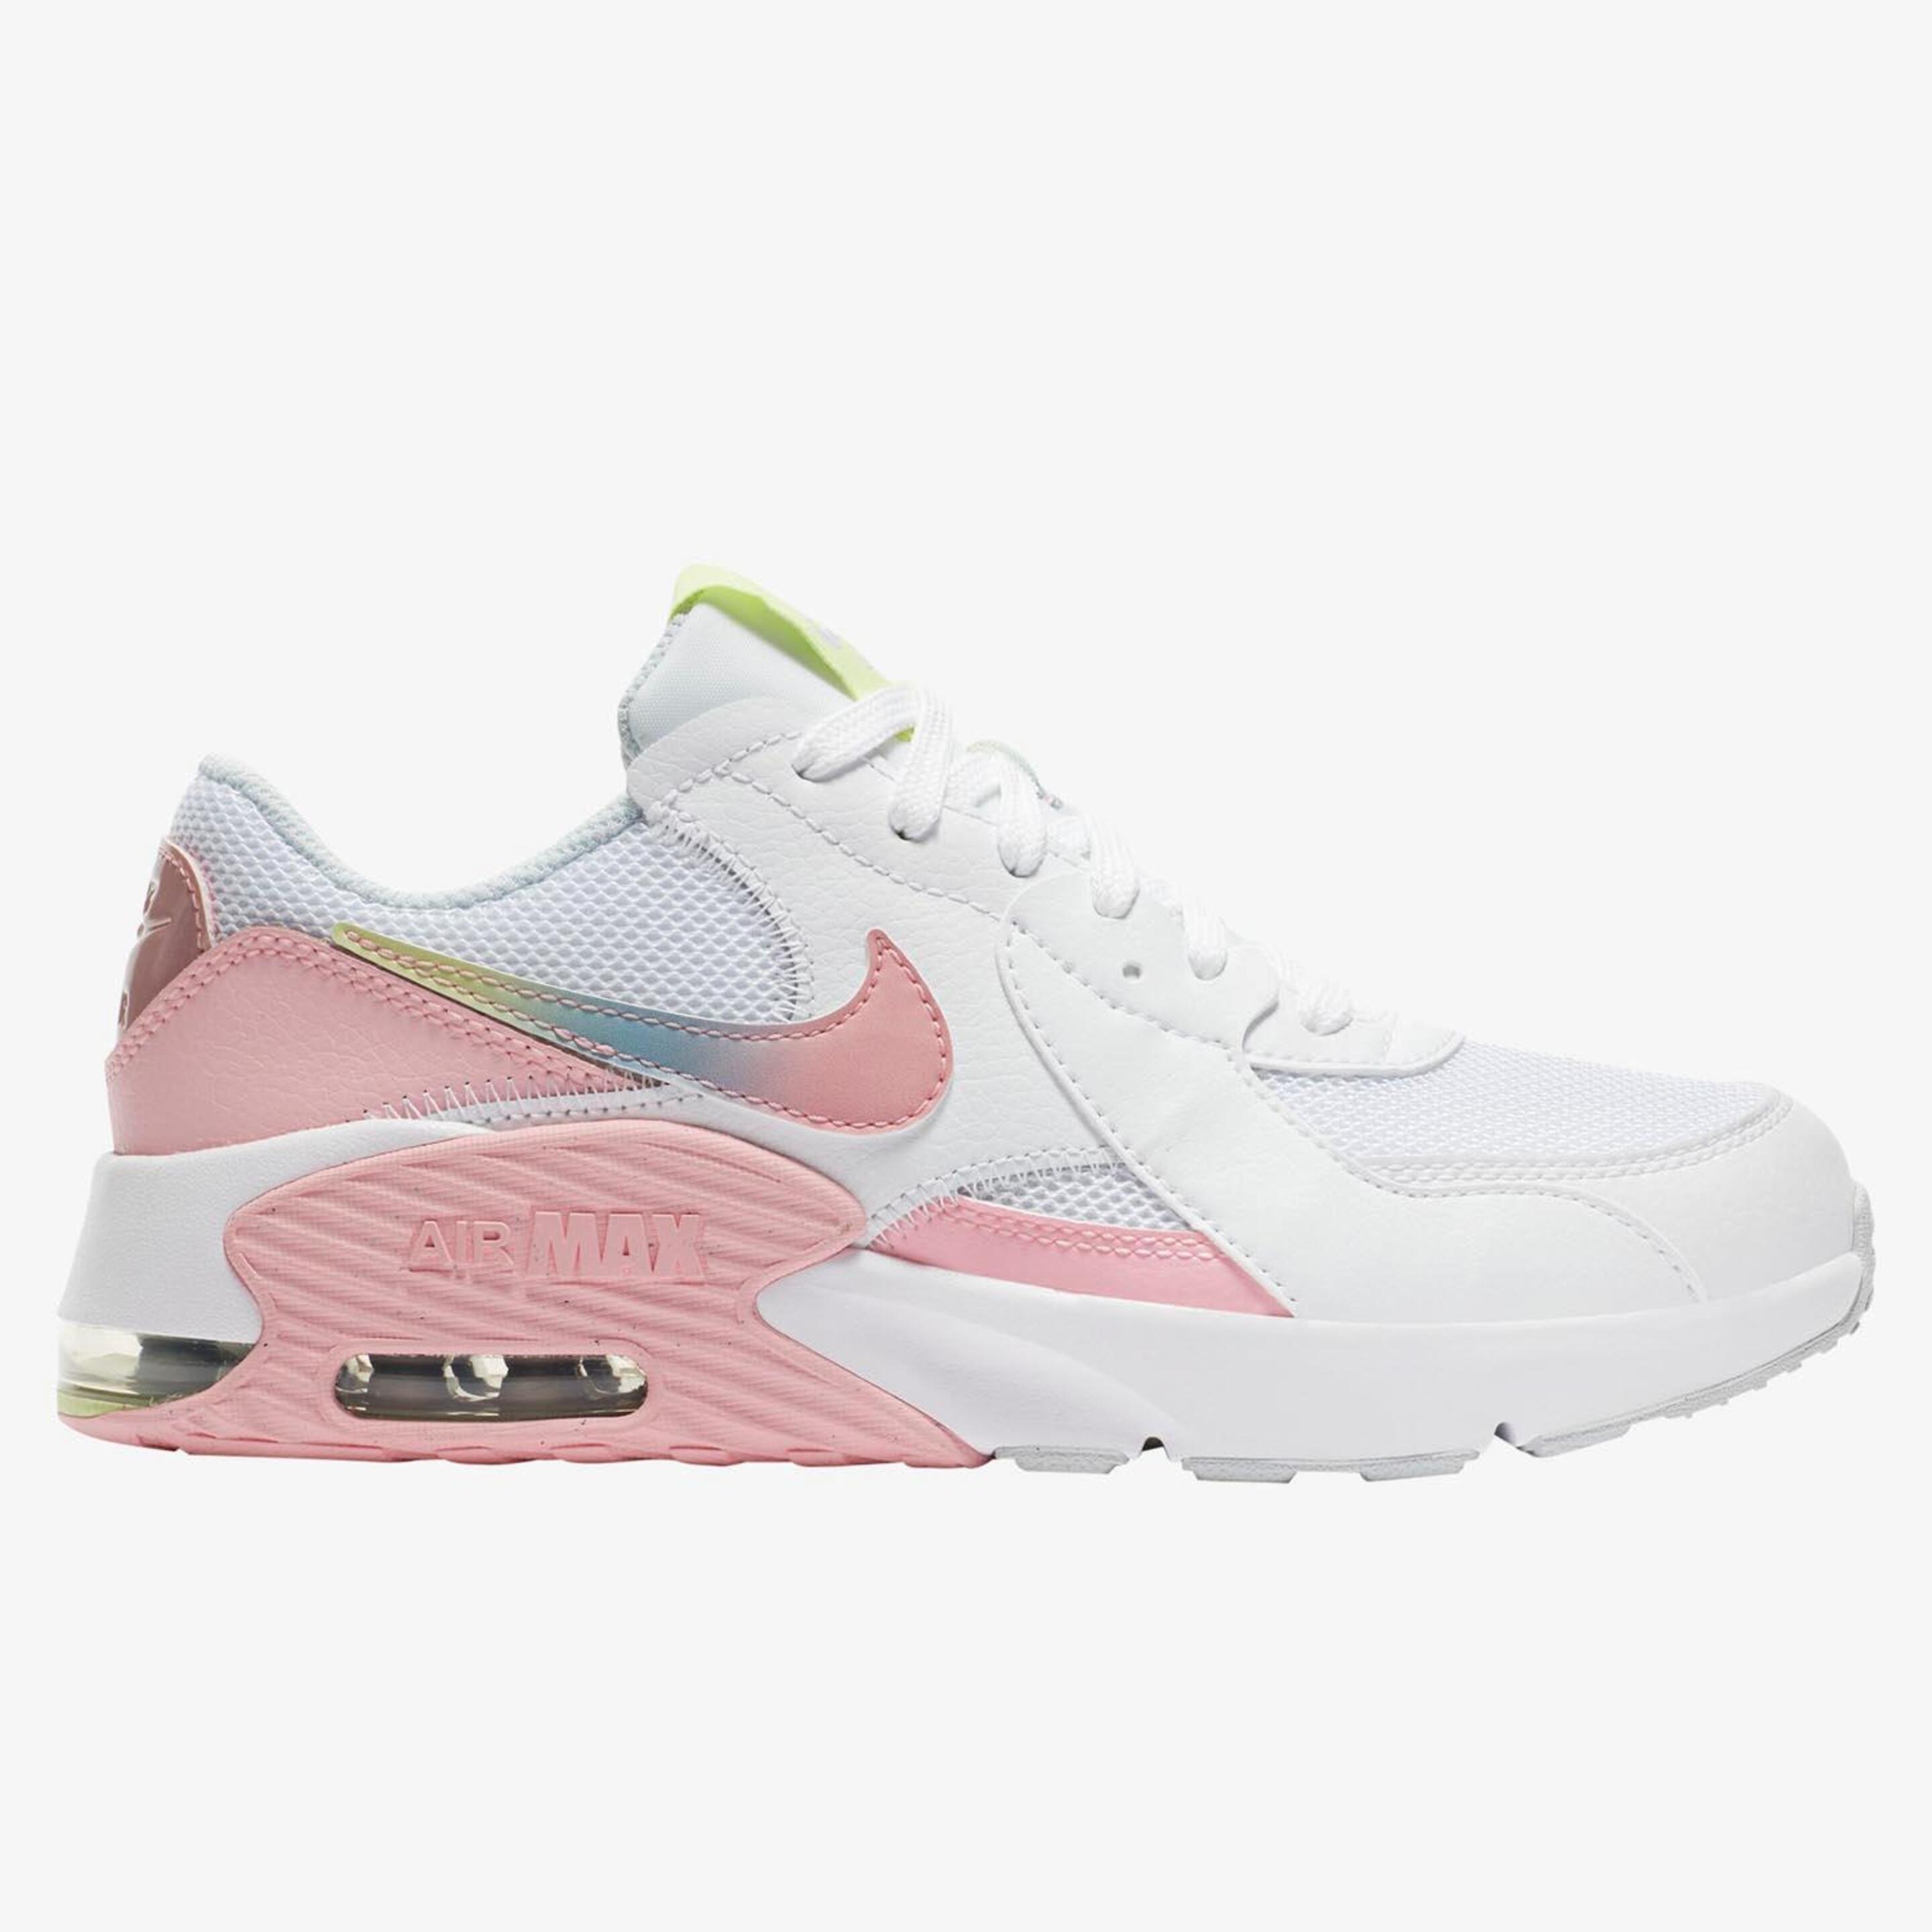 Air Max Excee Chica Dptvo Retrorunning C. Aire